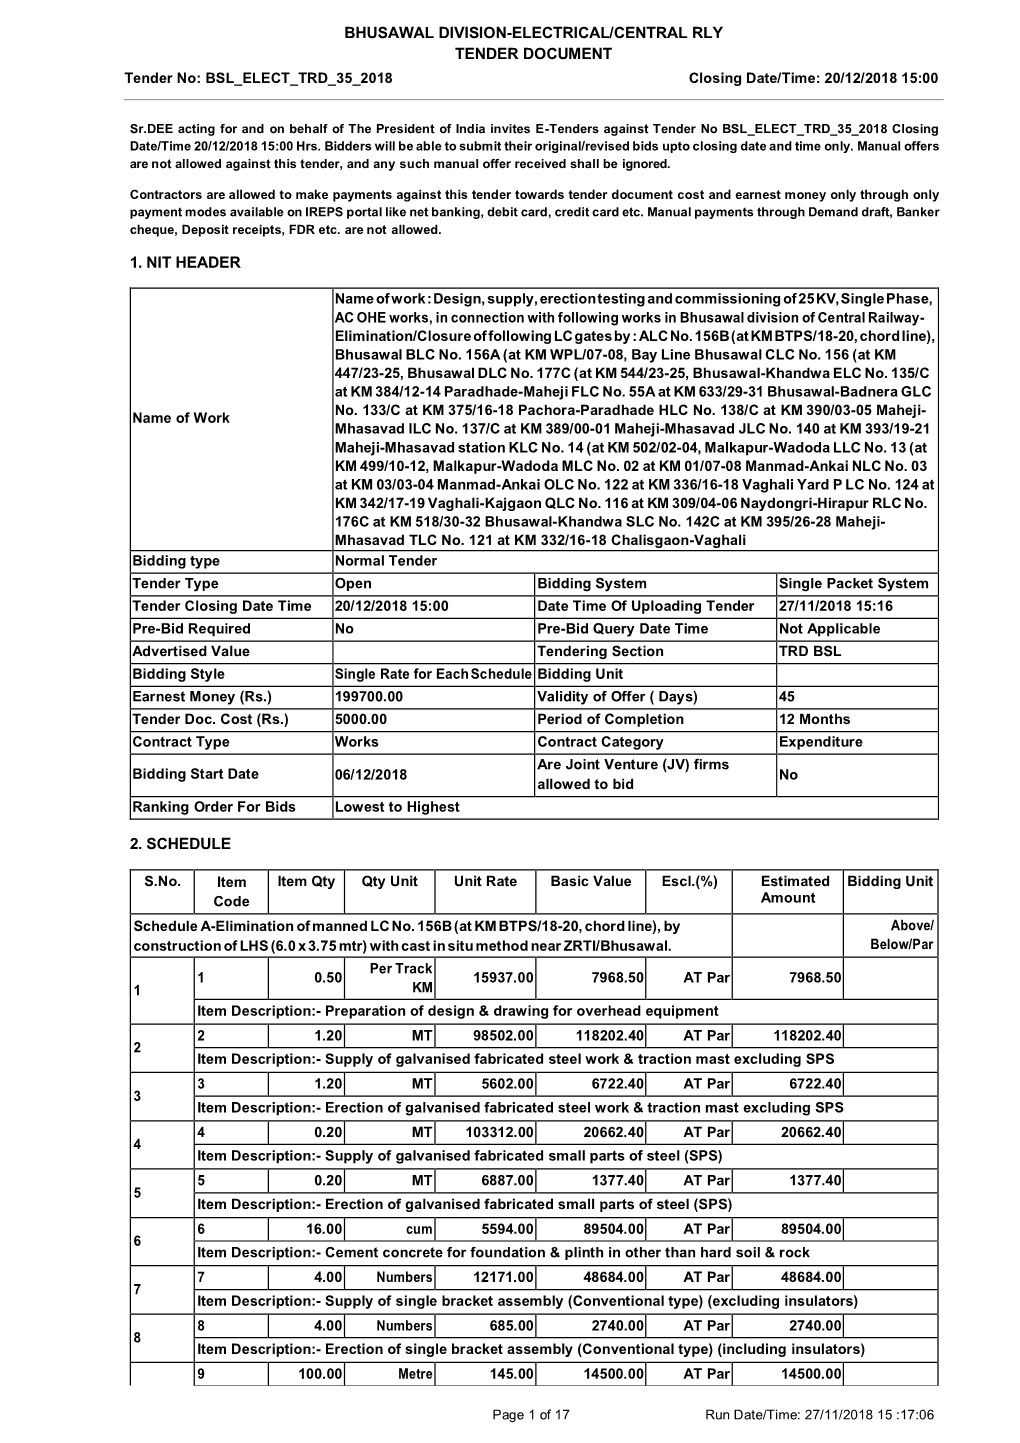 BHUSAWAL DIVISION-ELECTRICAL/CENTRAL RLY TENDER DOCUMENT Tender No: BSL ELECT TRD 35 2018 Closing Date/Time: 20/12/2018 15:00